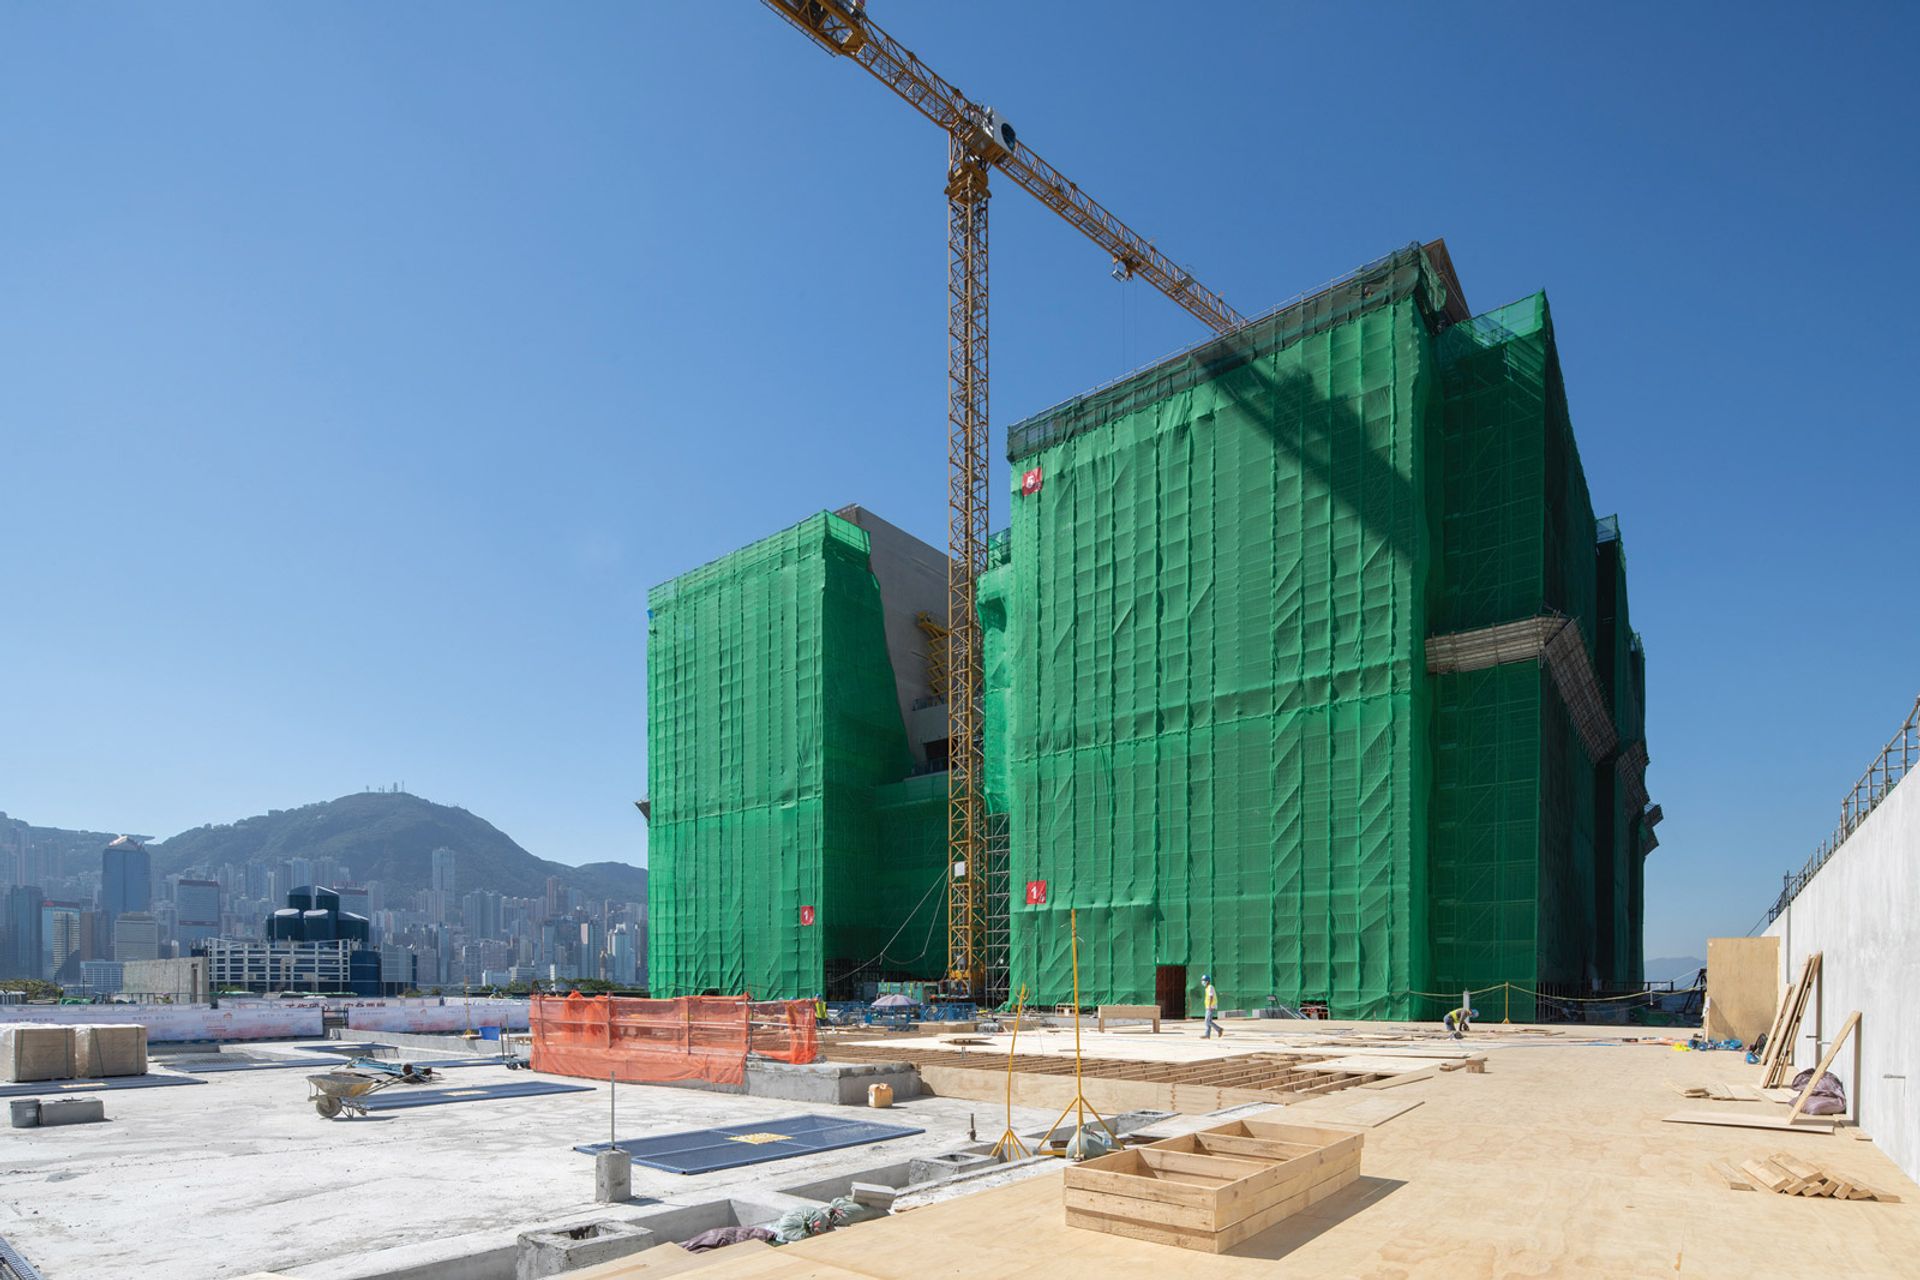 The museum under construction in the West Kowloon Cultural District aims to relate Chinese national treasures to modern life Courtesy of the Hong Kong Palace Museum